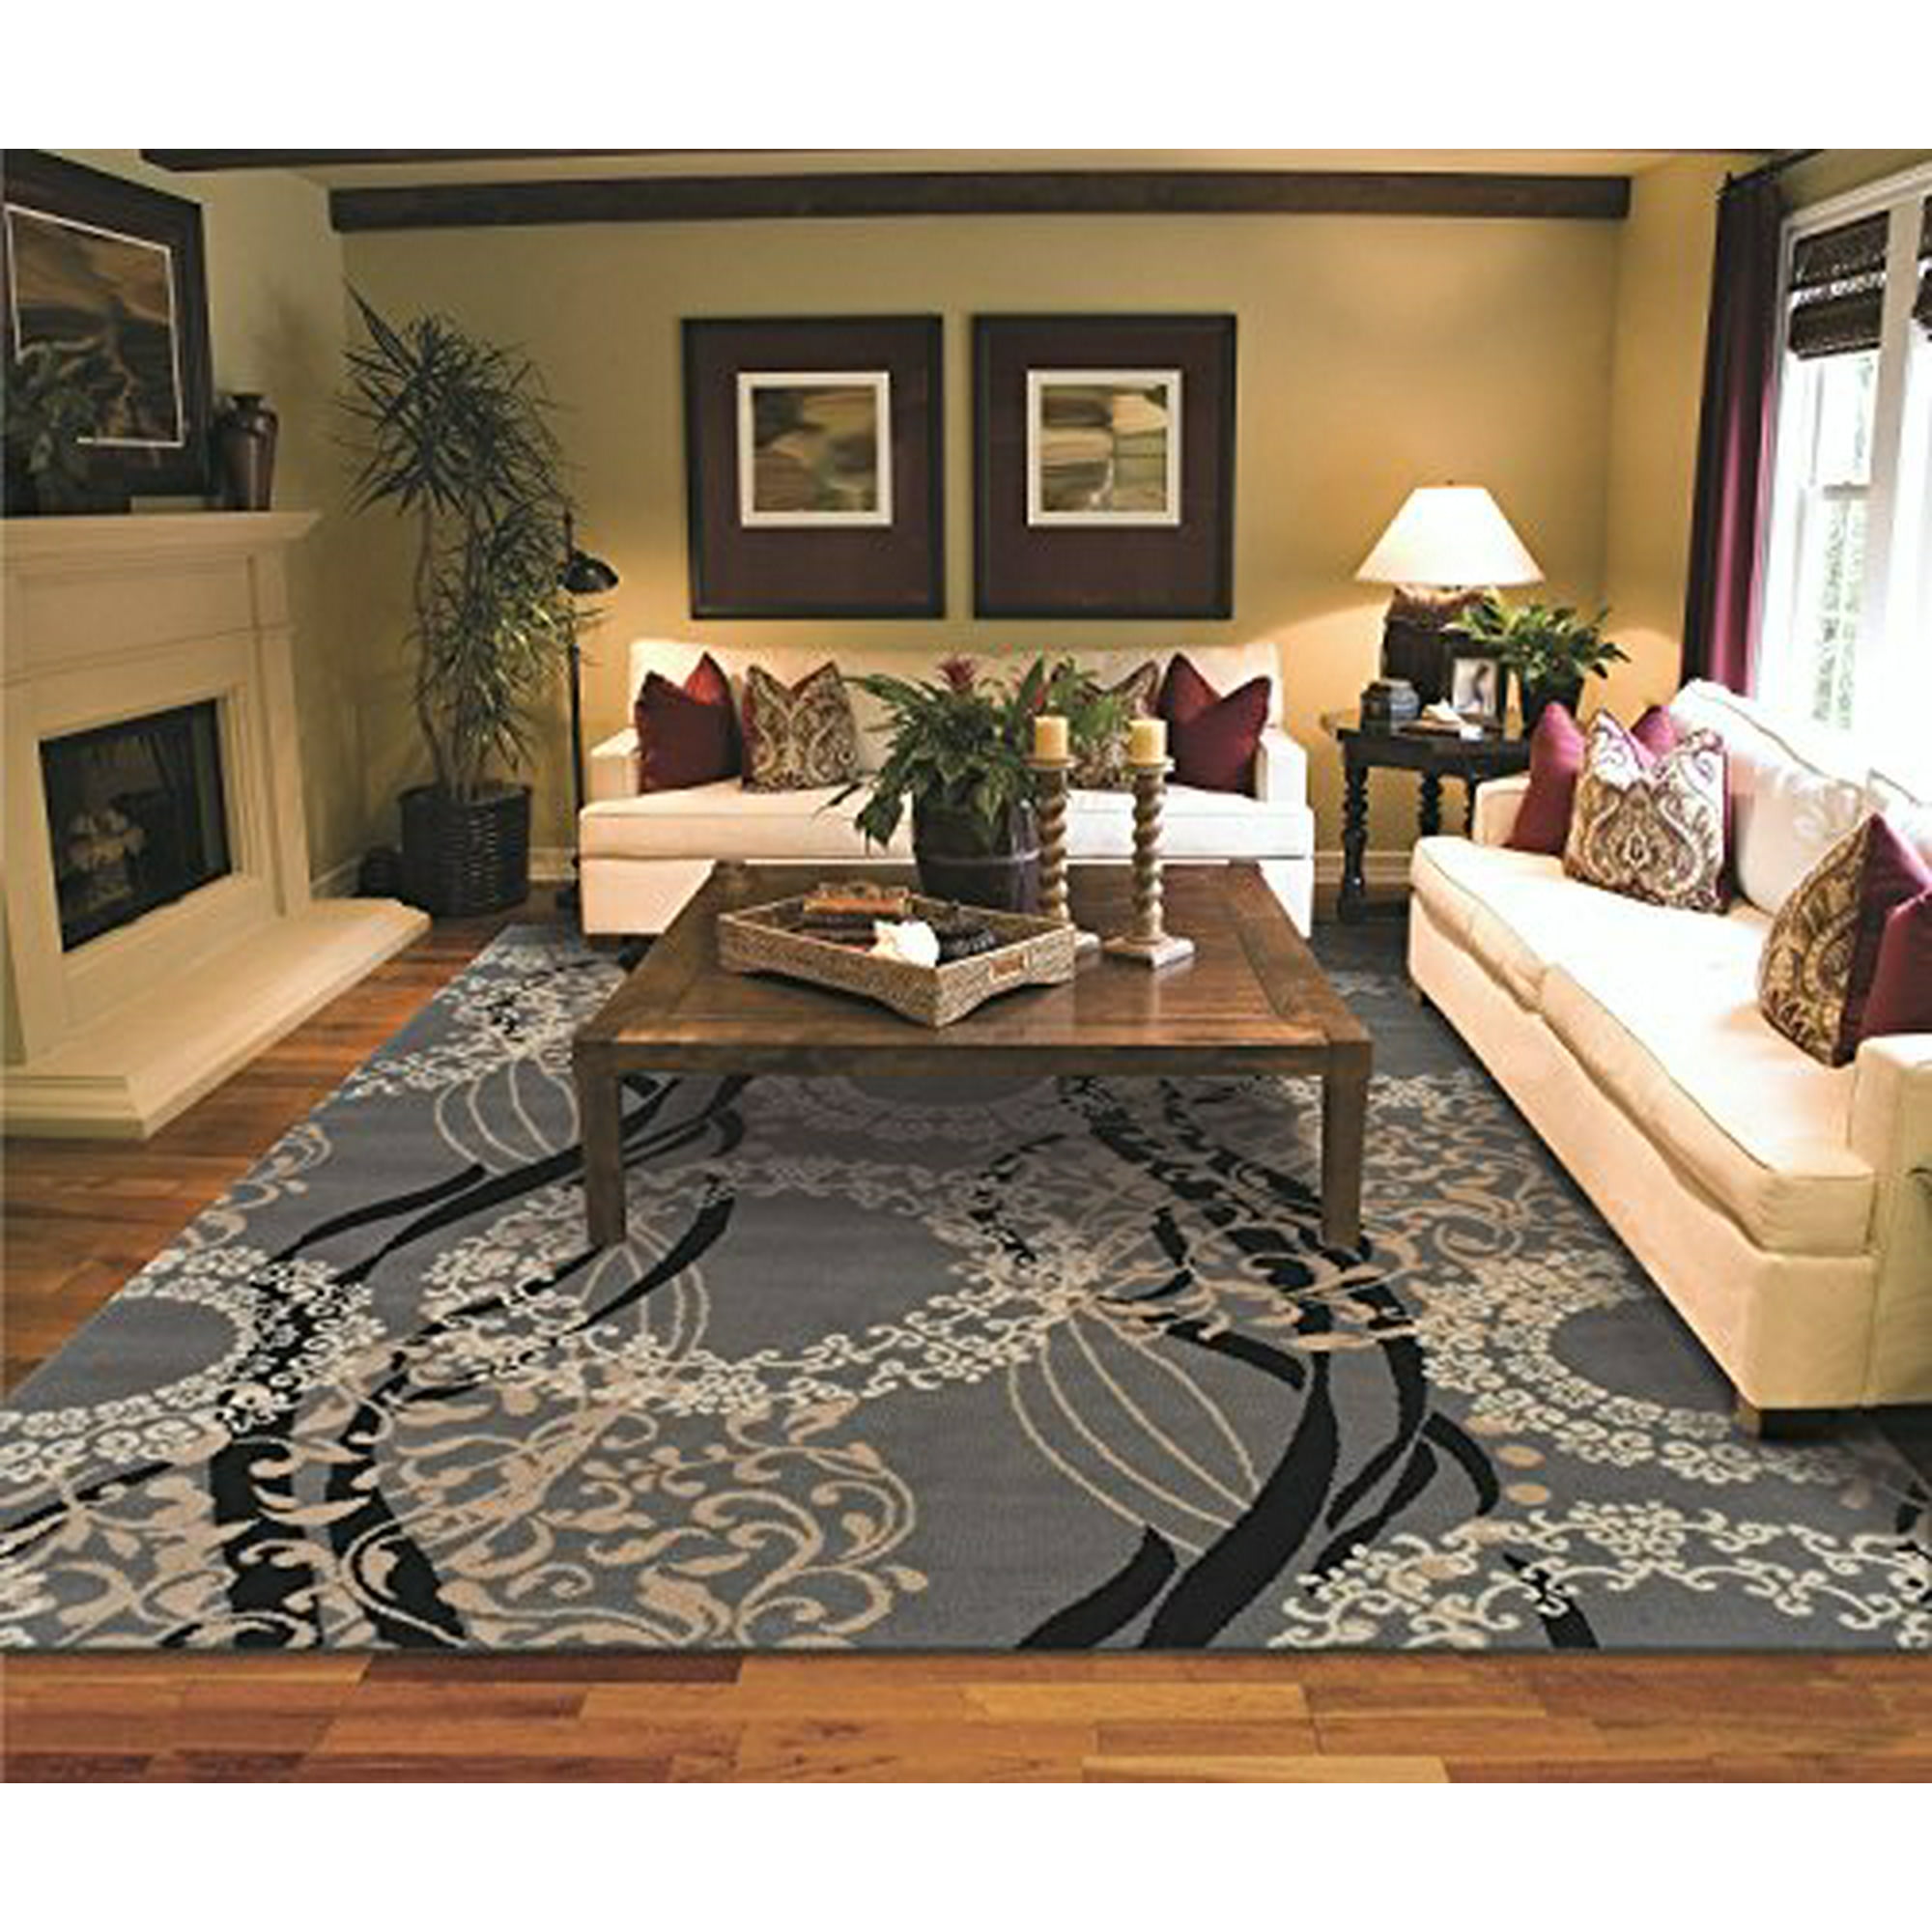 Large Area Rugs For Living Room 8x10, Large Area Rugs Under 2000